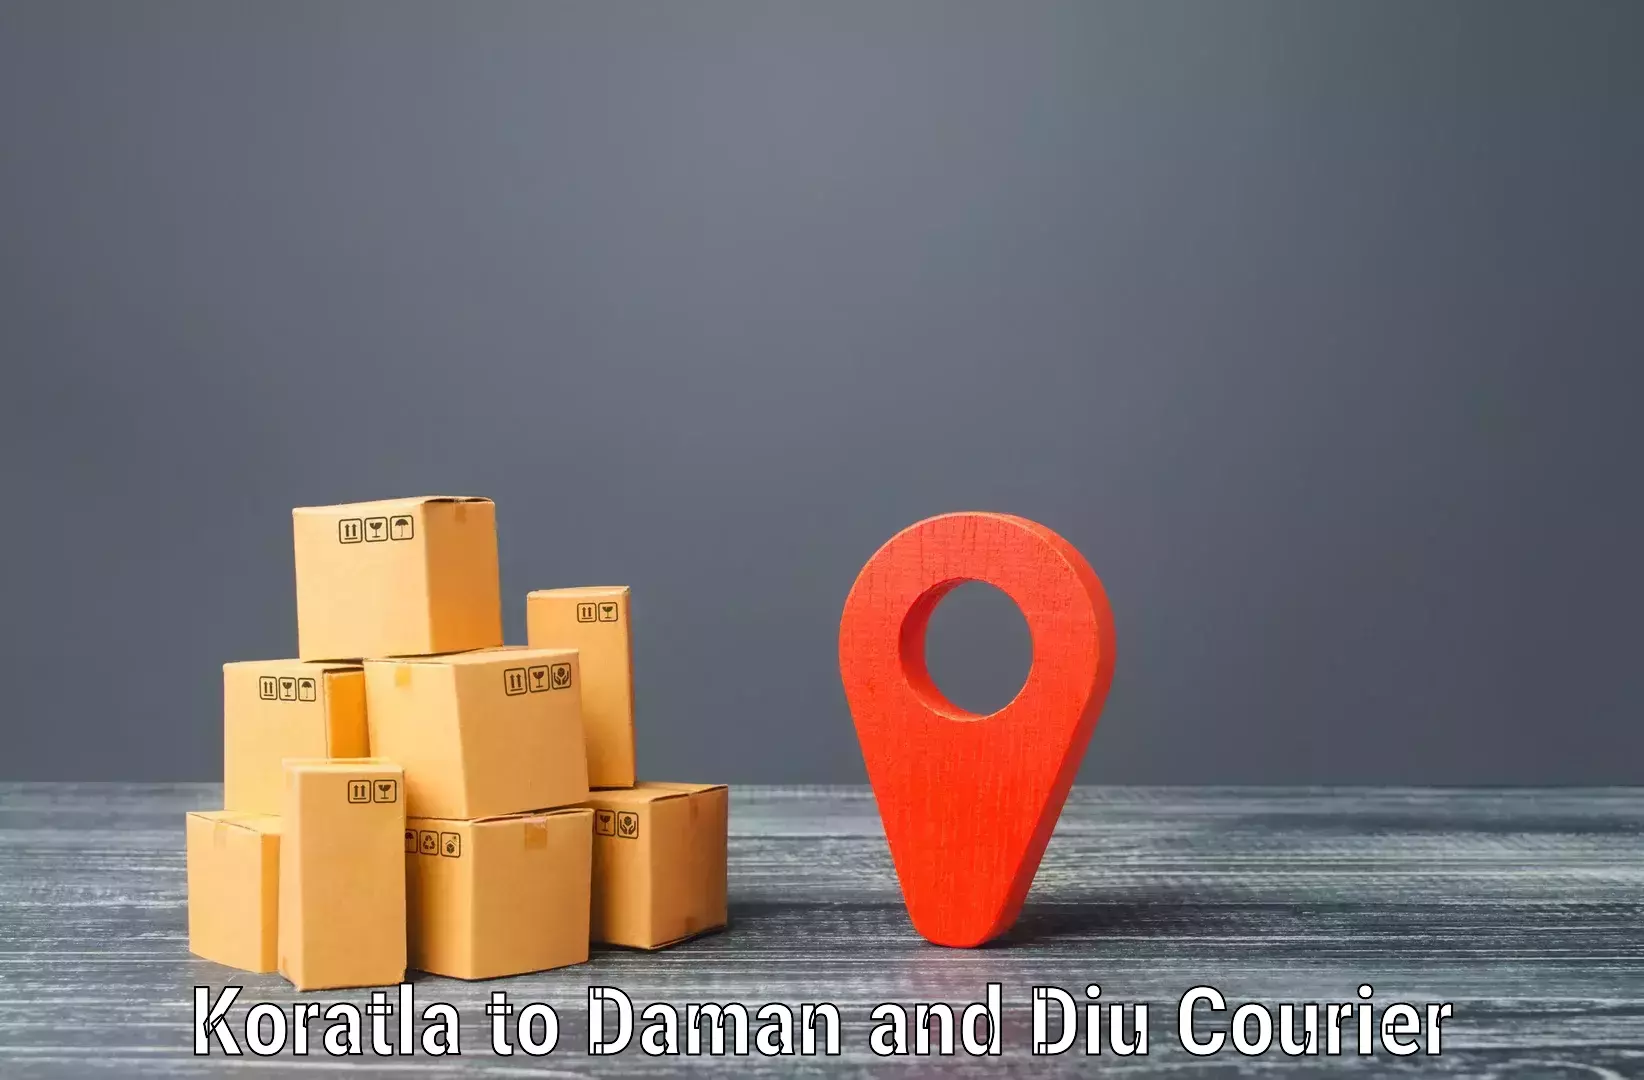 Efficient courier operations Koratla to Daman and Diu